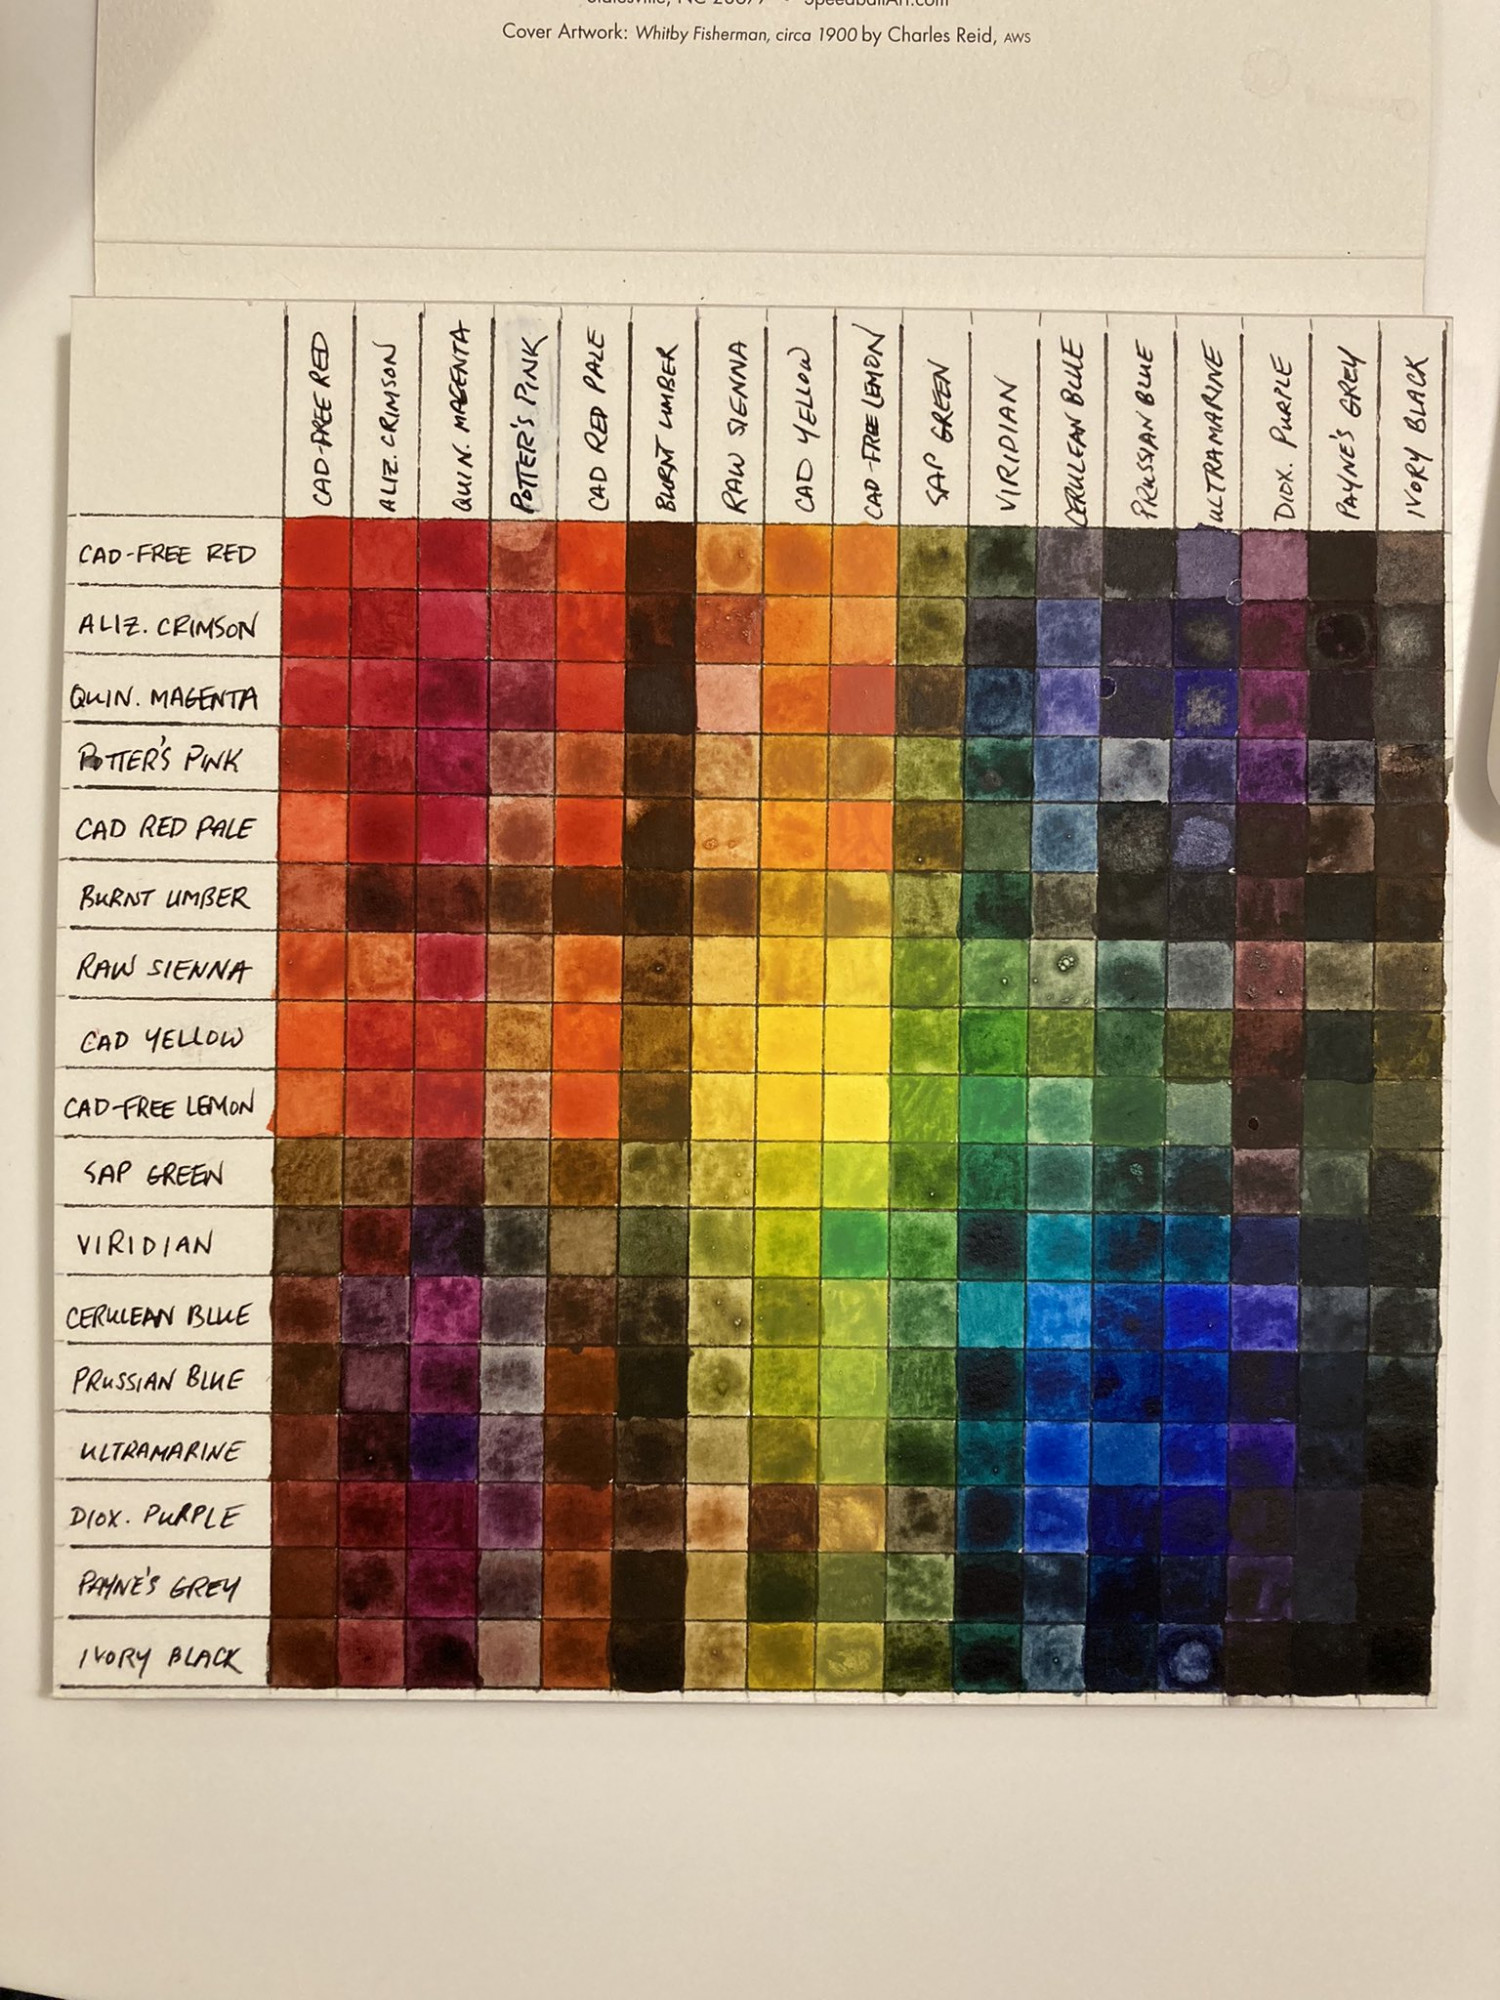 A piece of paper covered in a grid of squares painted in different colors, labeled with all of the colors along both axes, showing a range of possible color mixes within the palette of paints that I own.